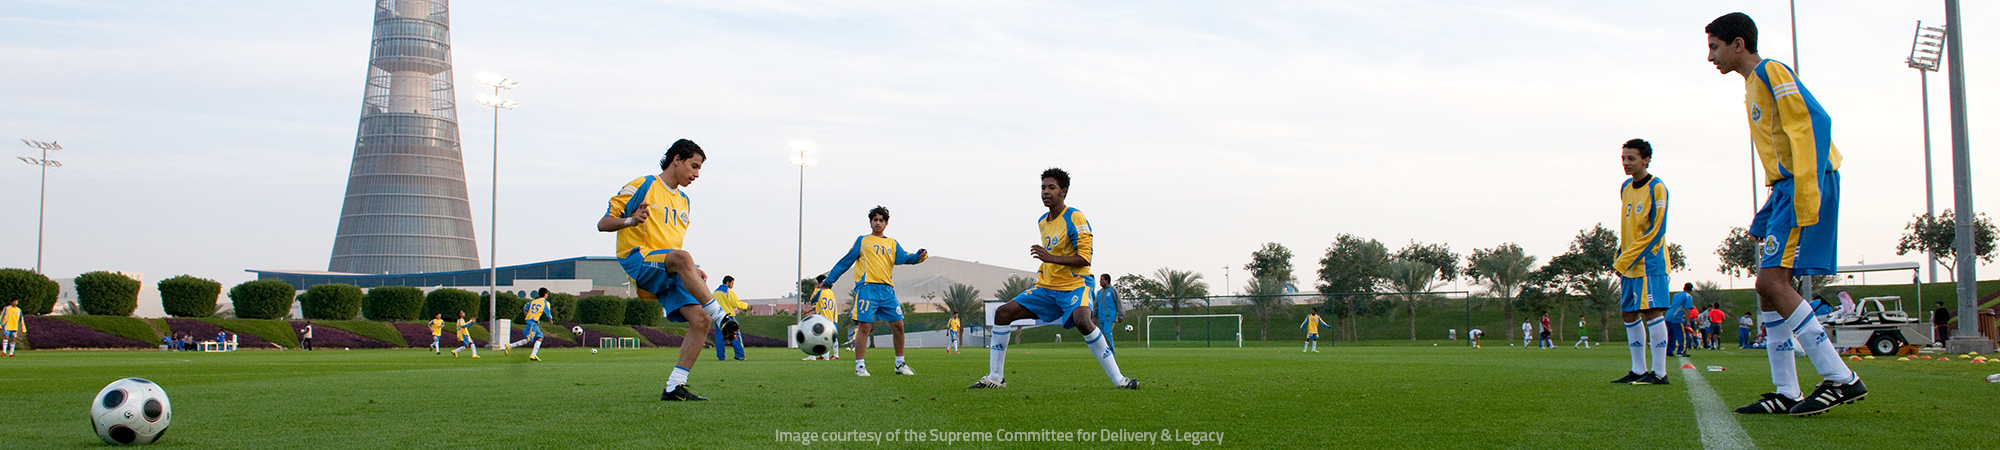 Leveraging the 2022 FIFA World Cup – Qatar for the Promotion of Green and Active Living